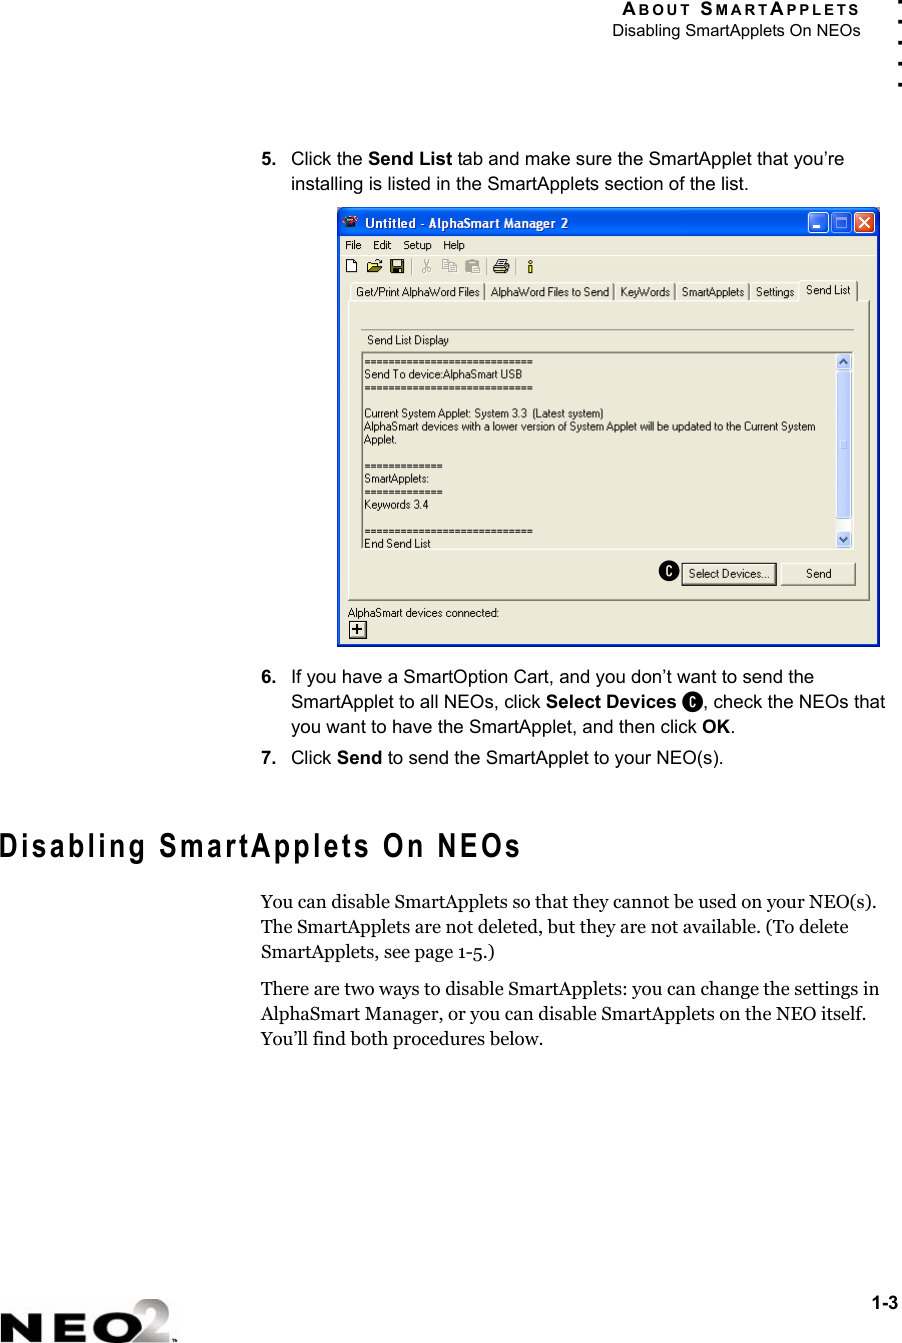 ABOUT SMARTAPPLETSDisabling SmartApplets On NEOs1-3. . . . .5. Click the Send List tab and make sure the SmartApplet that you’re installing is listed in the SmartApplets section of the list. 6. If you have a SmartOption Cart, and you don’t want to send the SmartApplet to all NEOs, click Select Devices C, check the NEOs that you want to have the SmartApplet, and then click OK.7. Click Send to send the SmartApplet to your NEO(s).Disabling SmartApplets On NEOsYou can disable SmartApplets so that they cannot be used on your NEO(s). The SmartApplets are not deleted, but they are not available. (To delete SmartApplets, see page 1-5.)There are two ways to disable SmartApplets: you can change the settings in AlphaSmart Manager, or you can disable SmartApplets on the NEO itself. You’ll find both procedures below.C